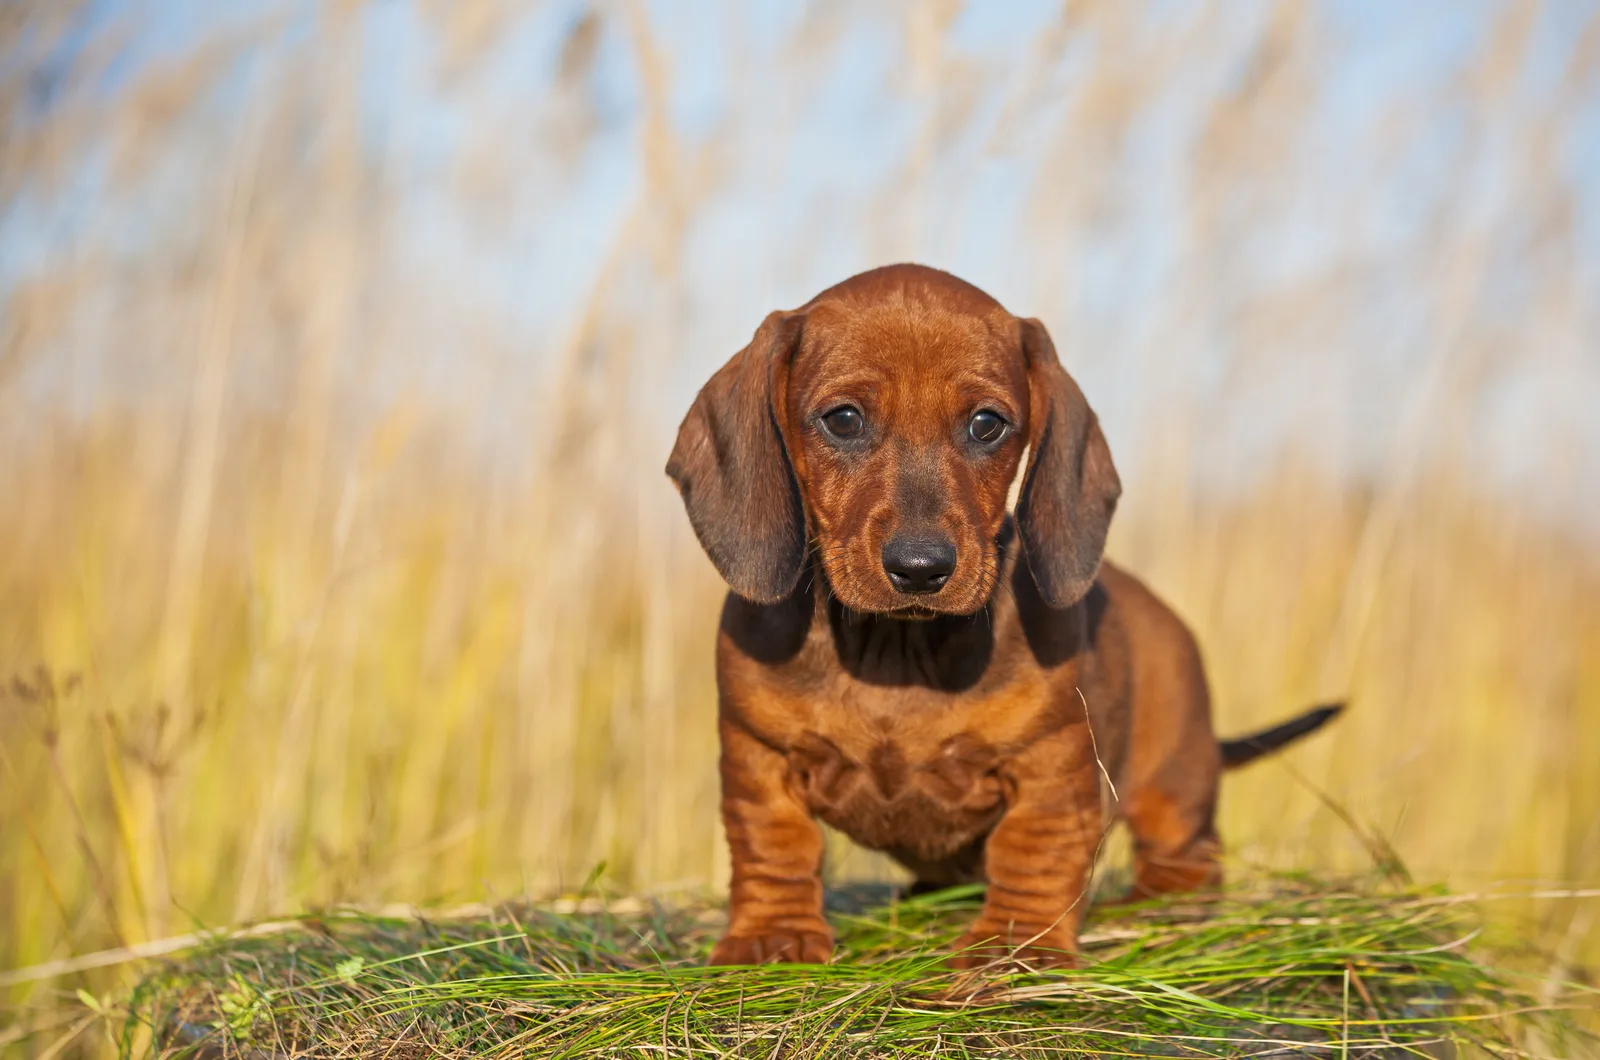 Dachshund puppies stands and looks at the camera